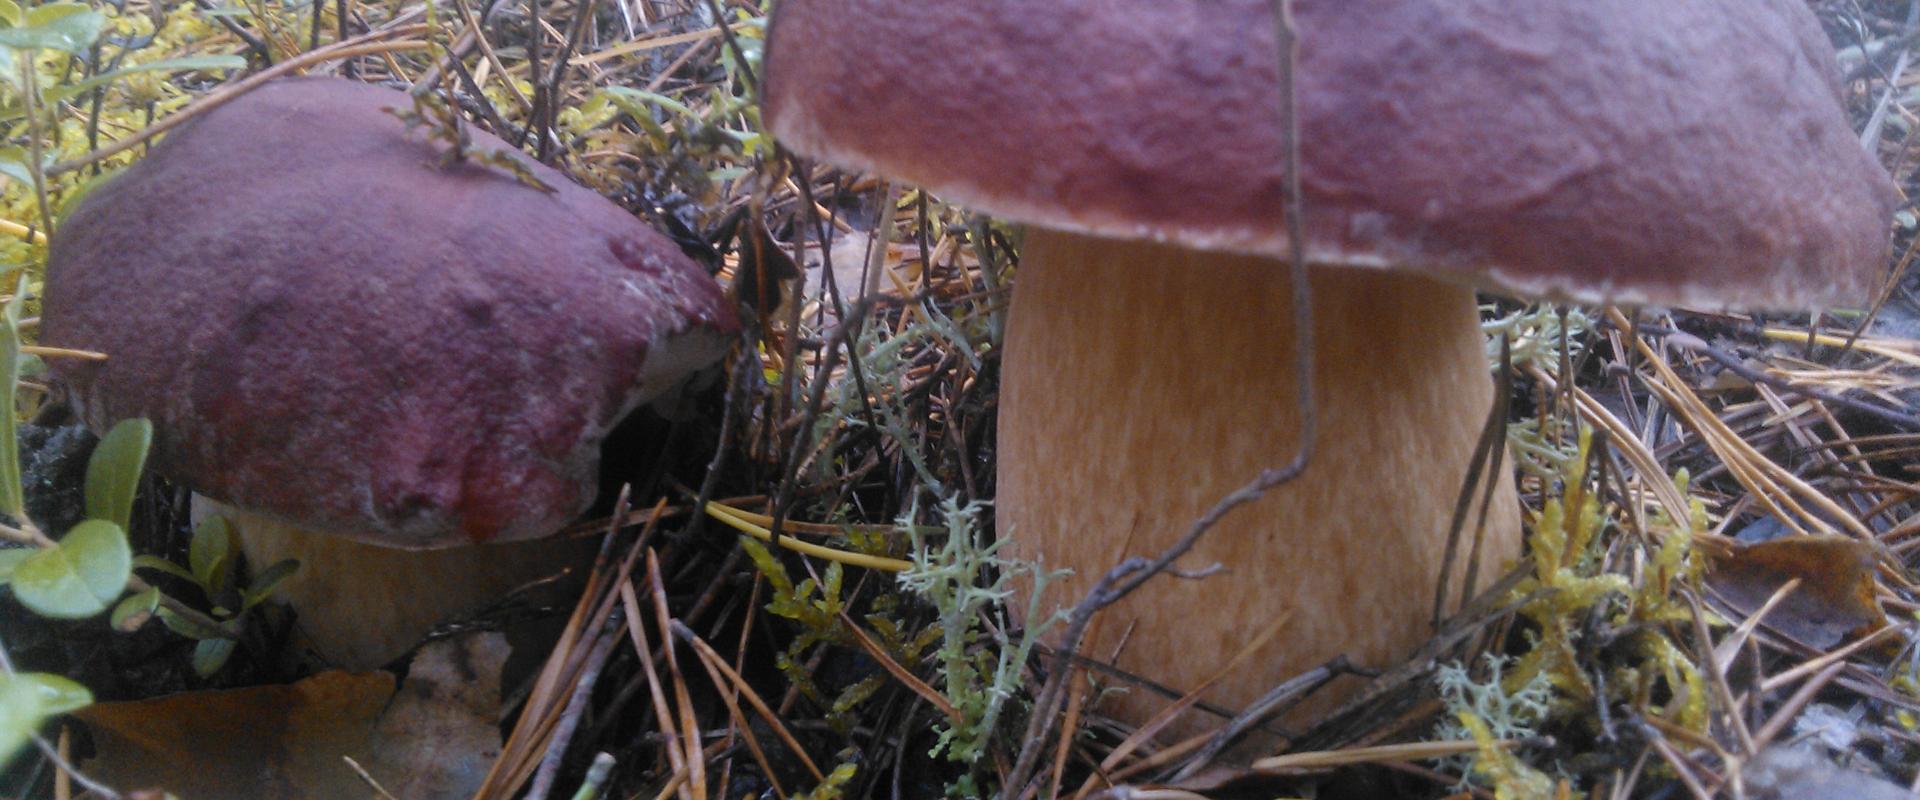 We organise excursions to lesser-known mushroom forests in Pärnu County in the second half of the summer and in autumn with an experienced mushroom ex